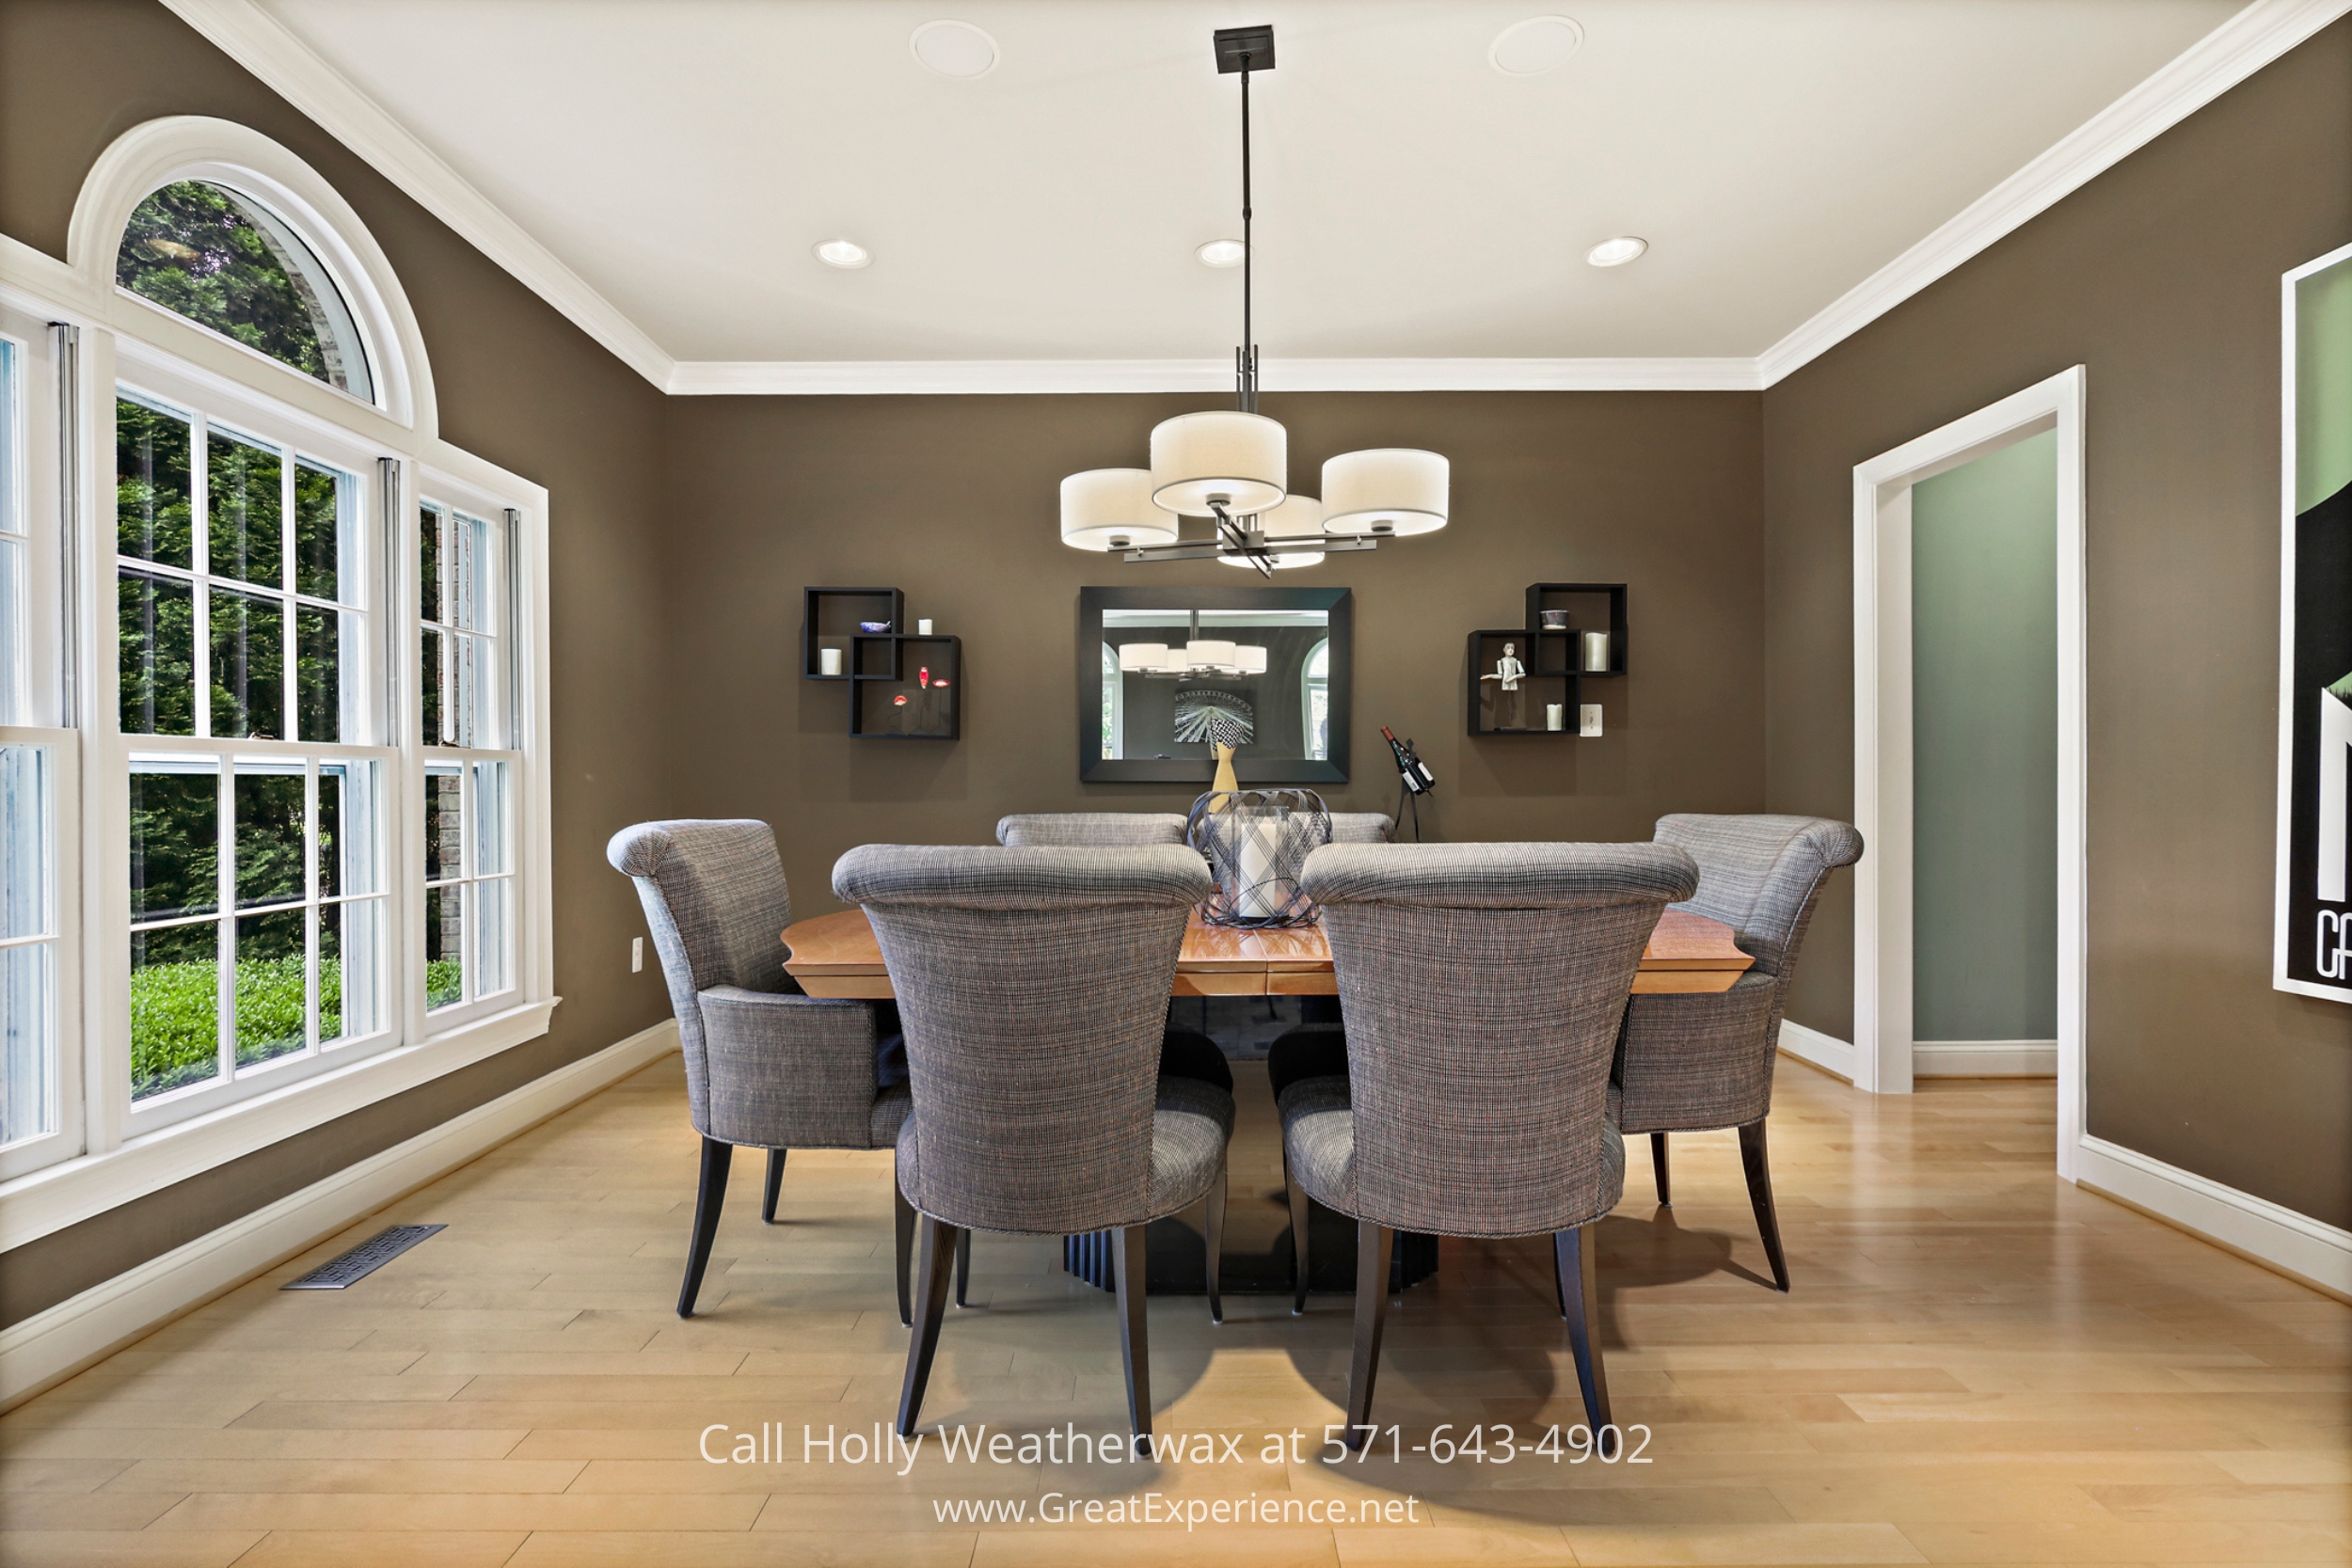 Elegant dining room showcasing a stylish table and chairs